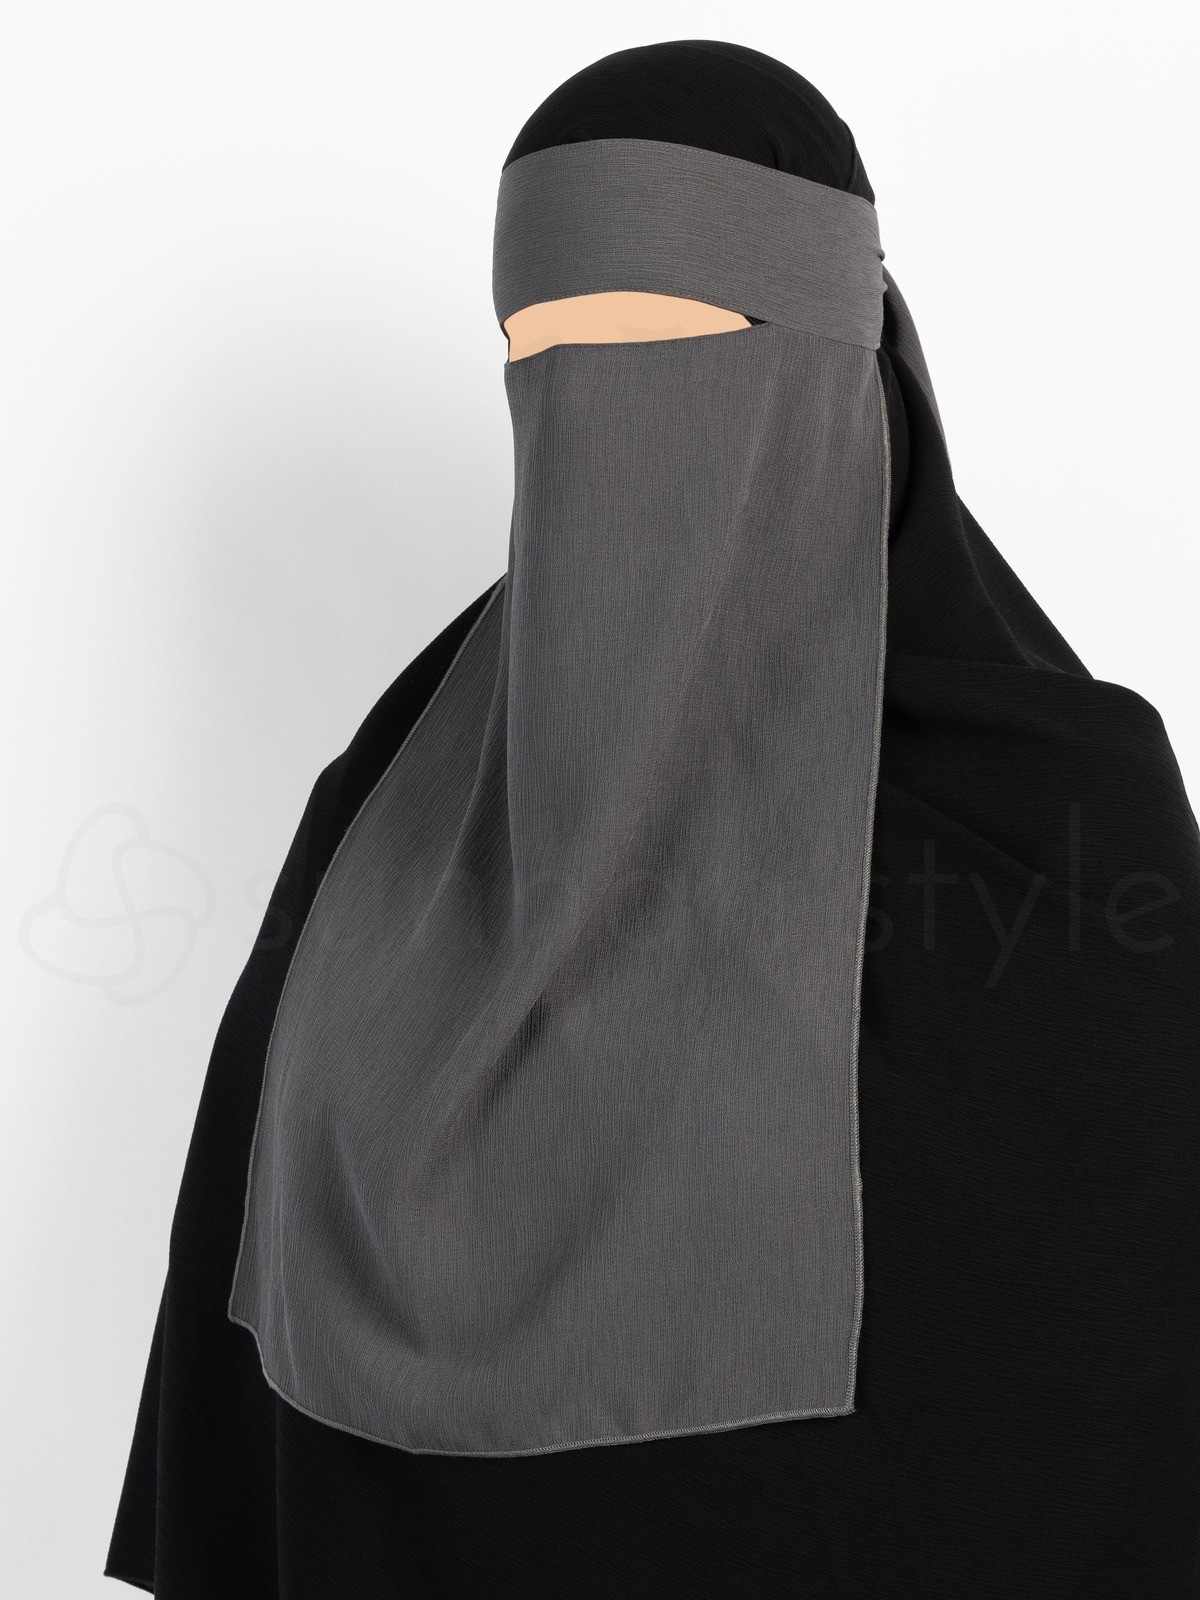 Sunnah Style - Brushed One Layer Niqab (Granite)